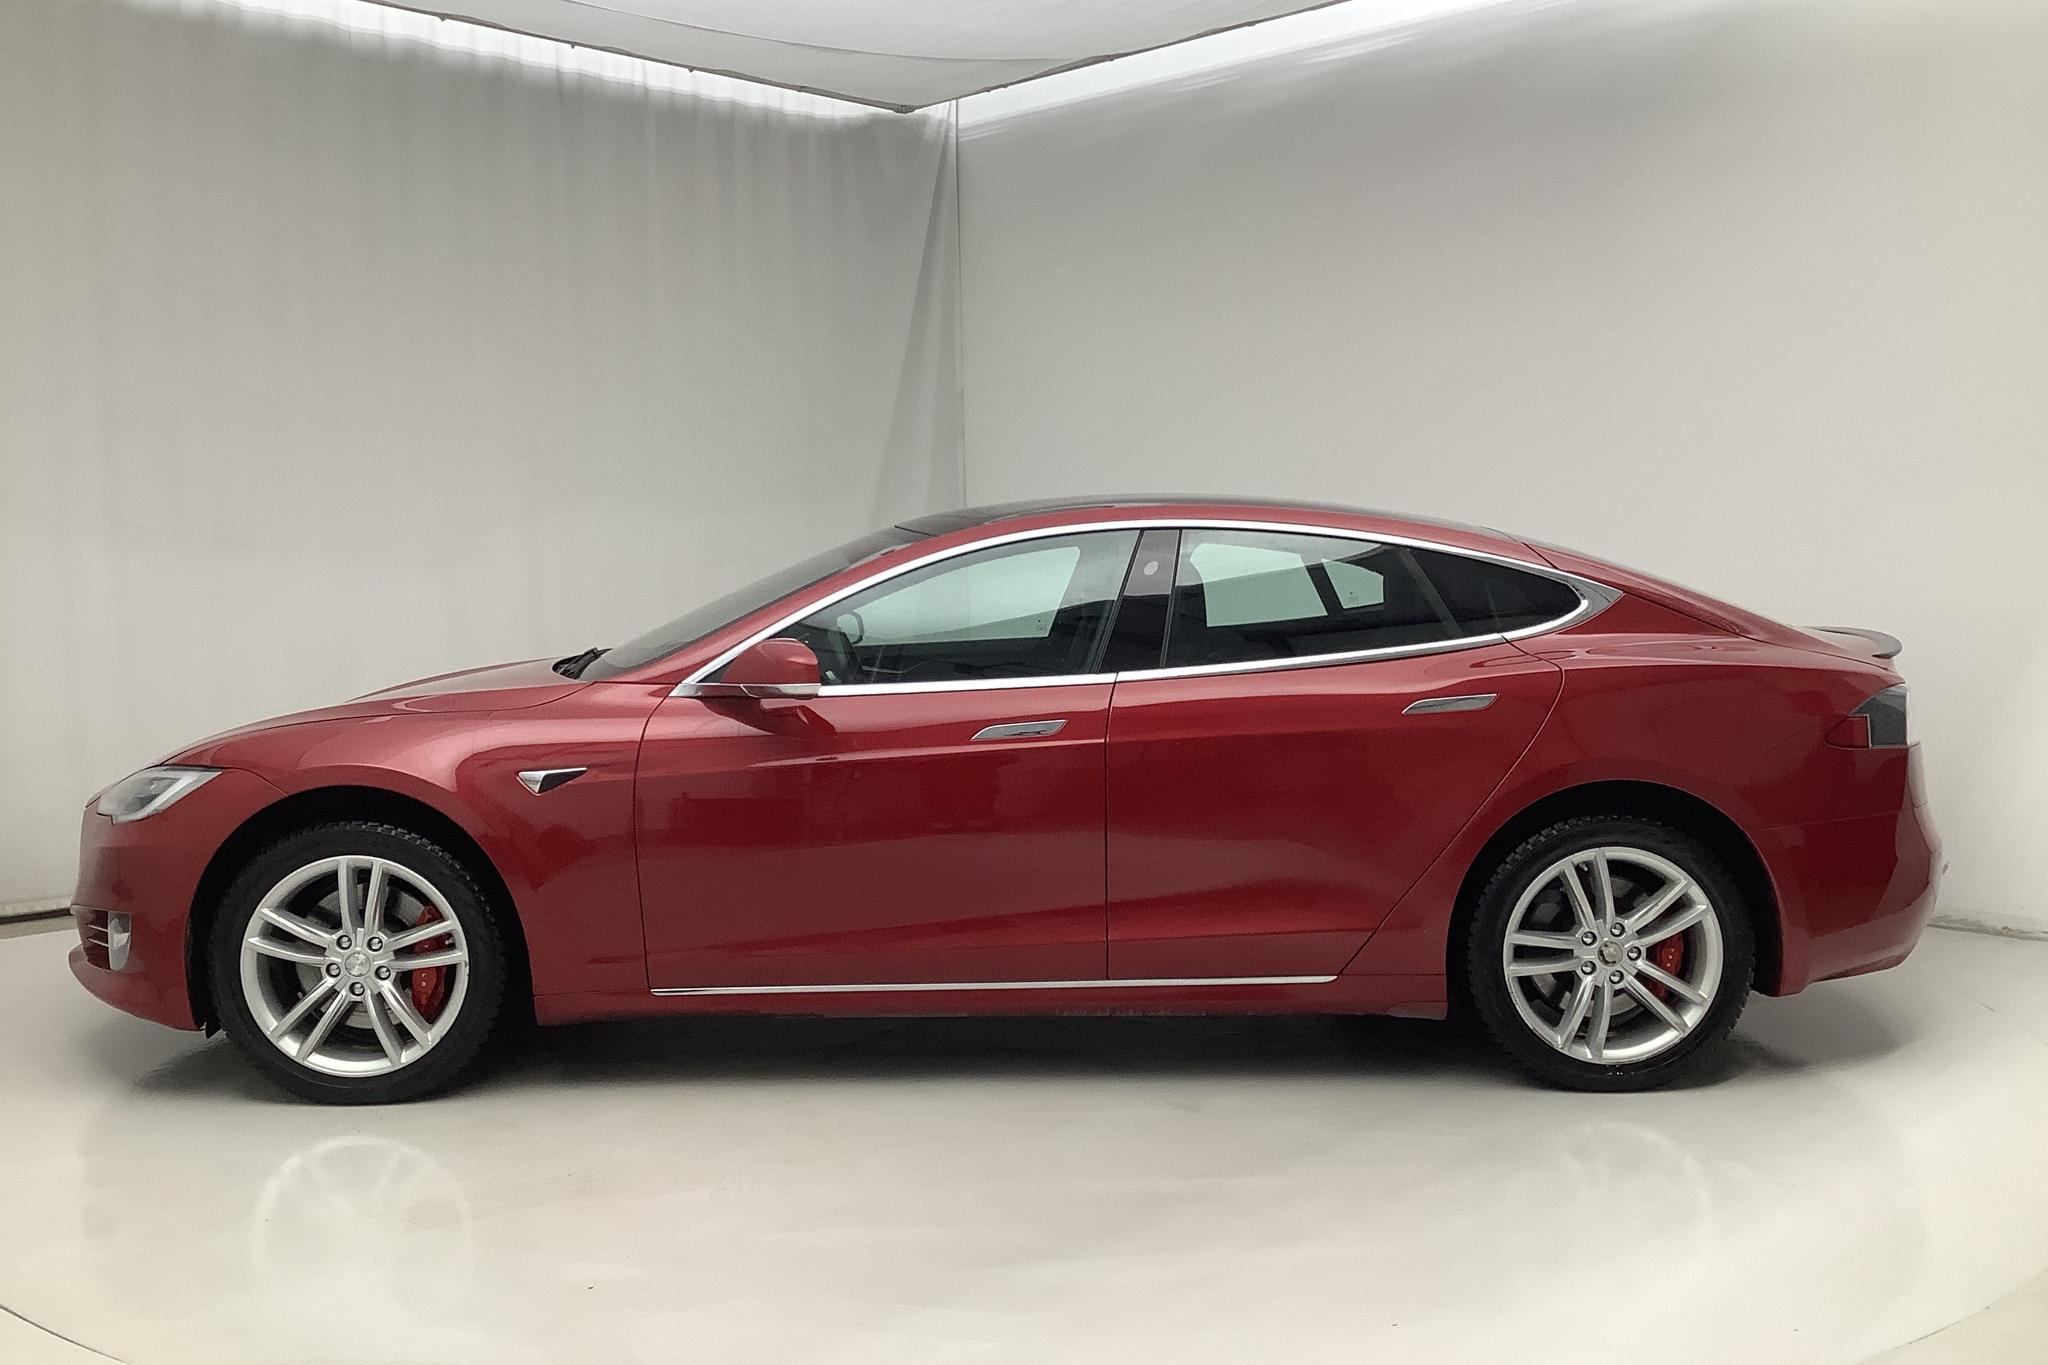 Tesla Model S P100D - 101 040 km - Automatic - red - 2018